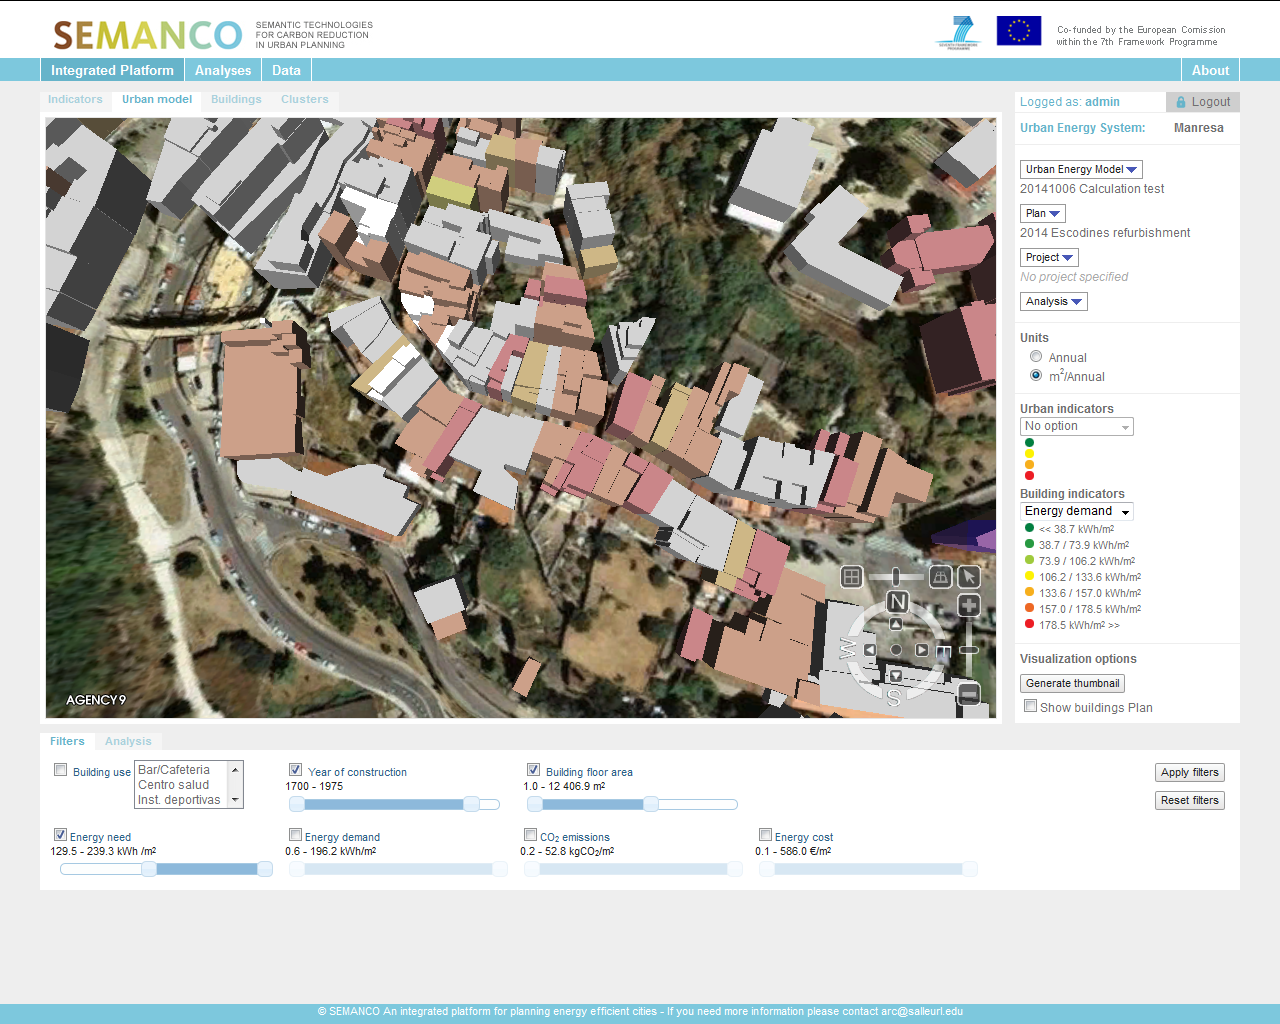 3.2. Filtering buildings according to energy related data